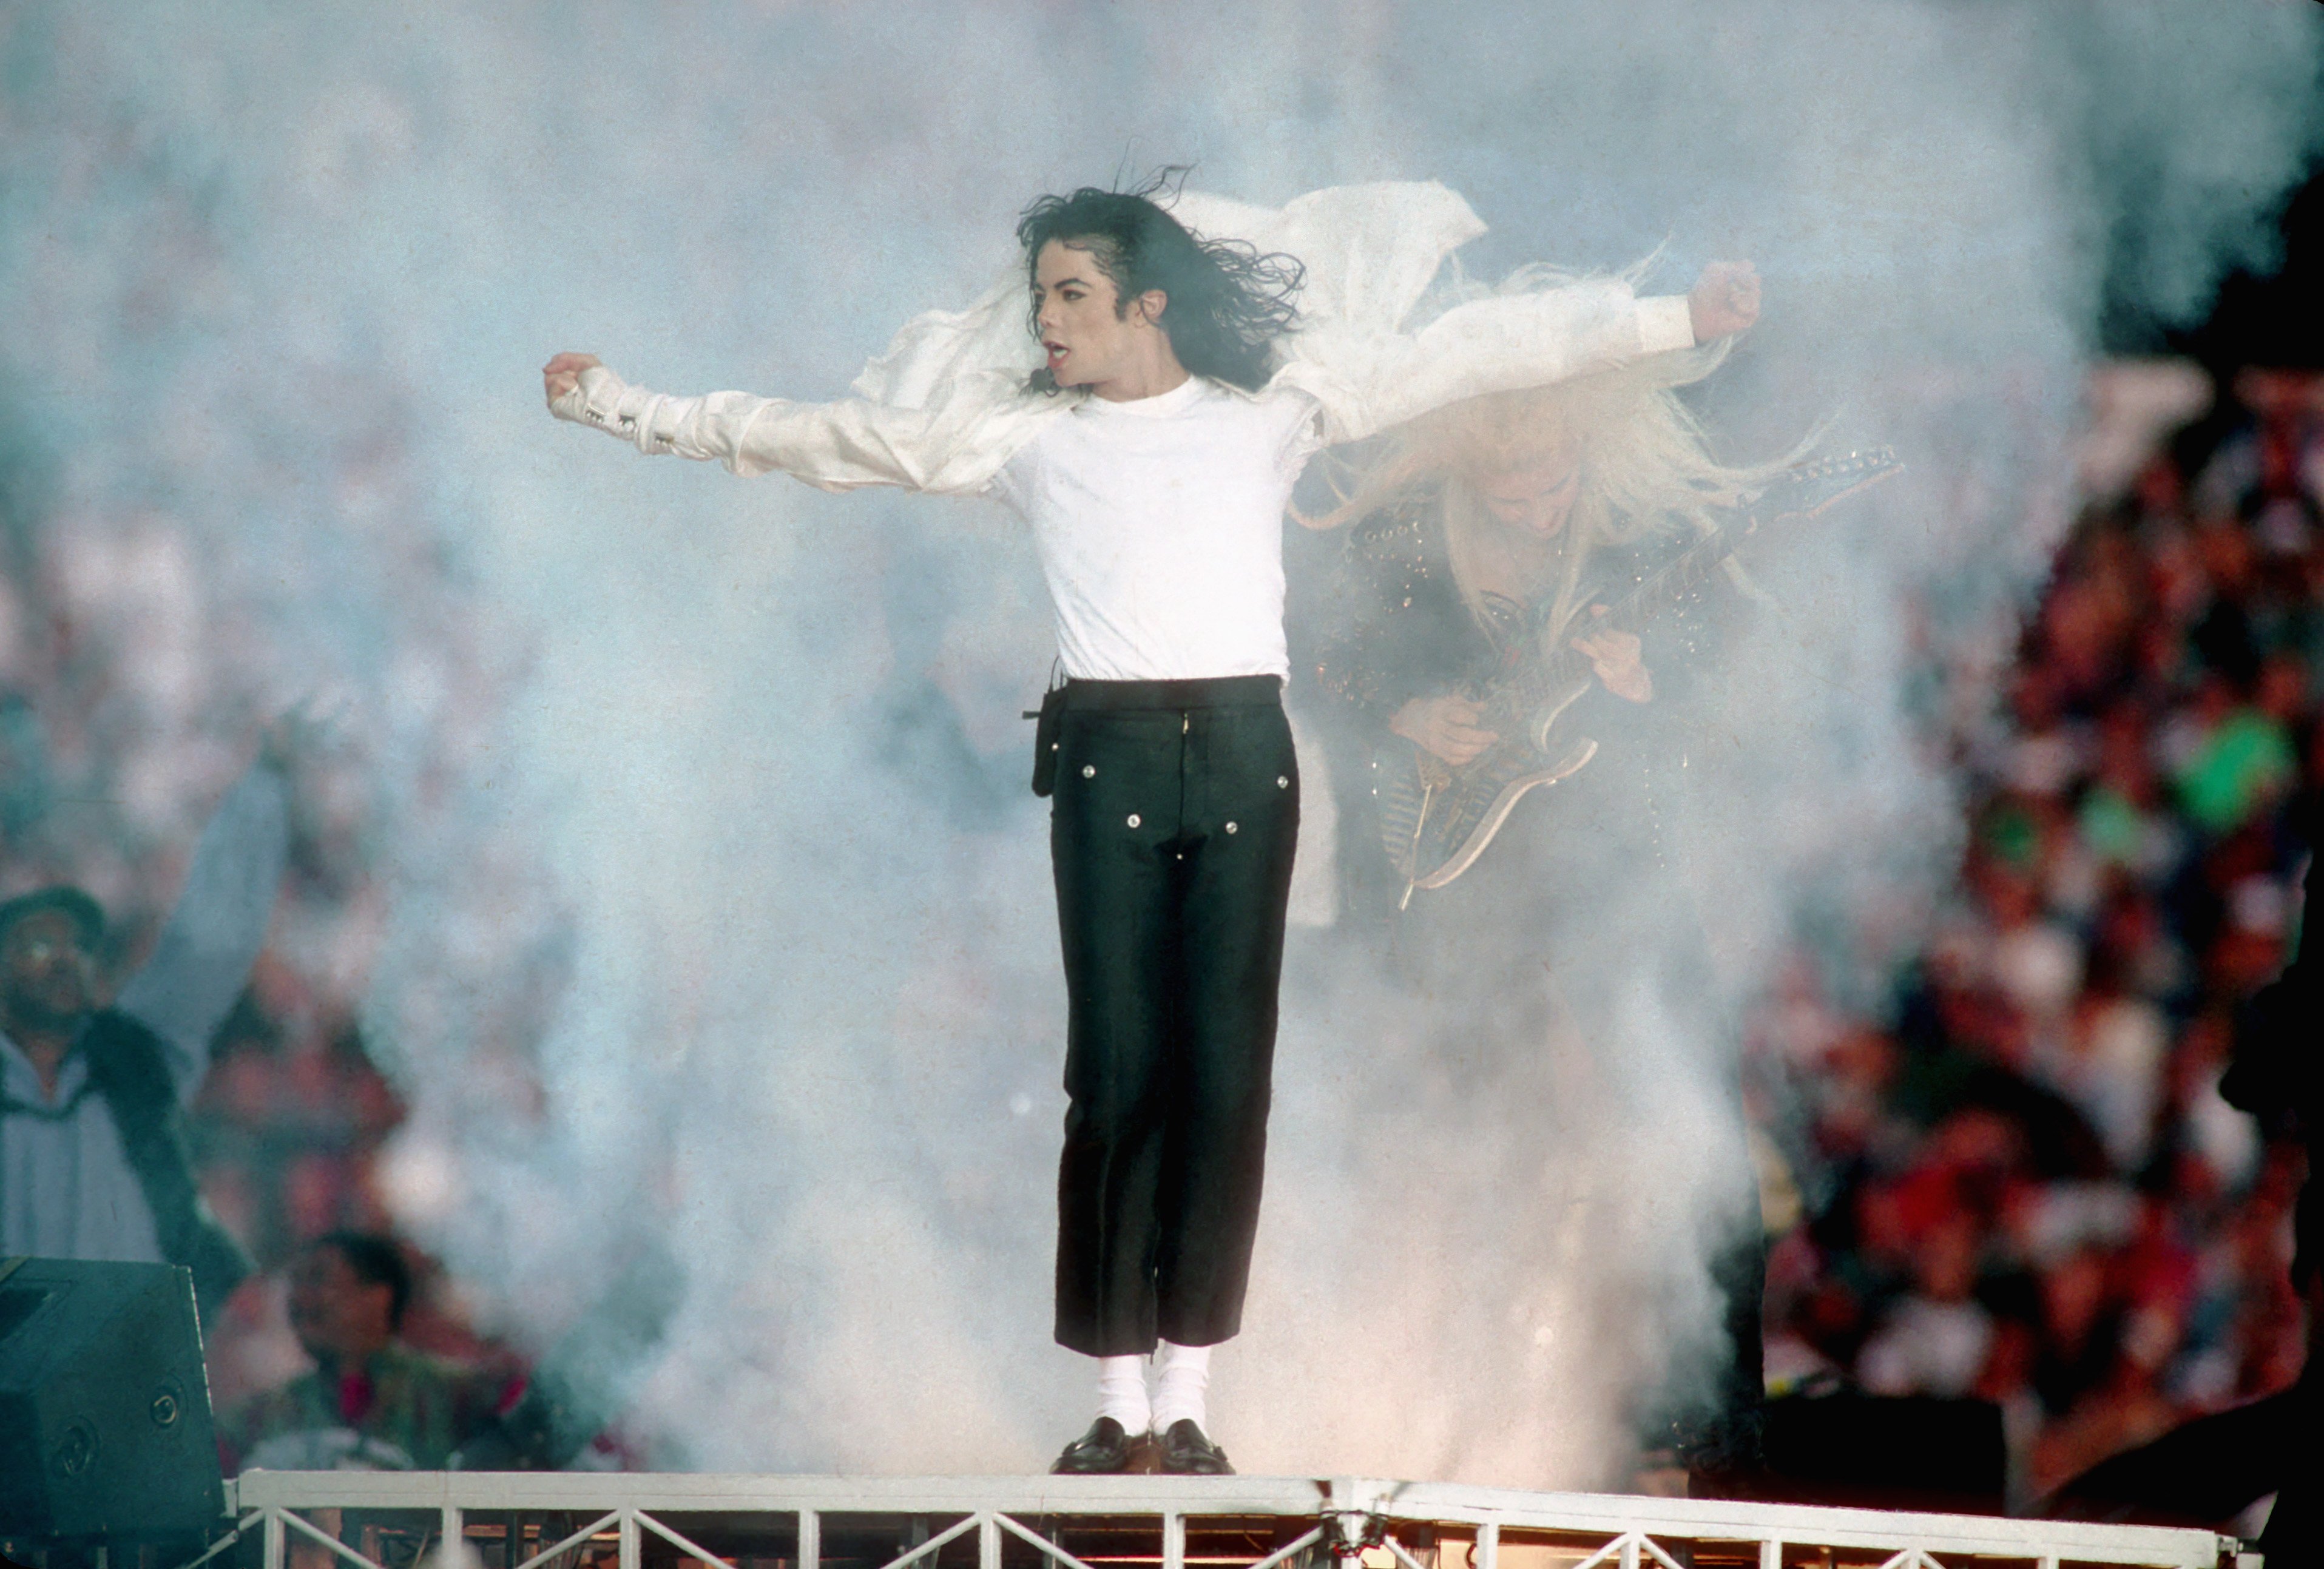 Michael Jackson performs during halftime of Super Bowl XXVII